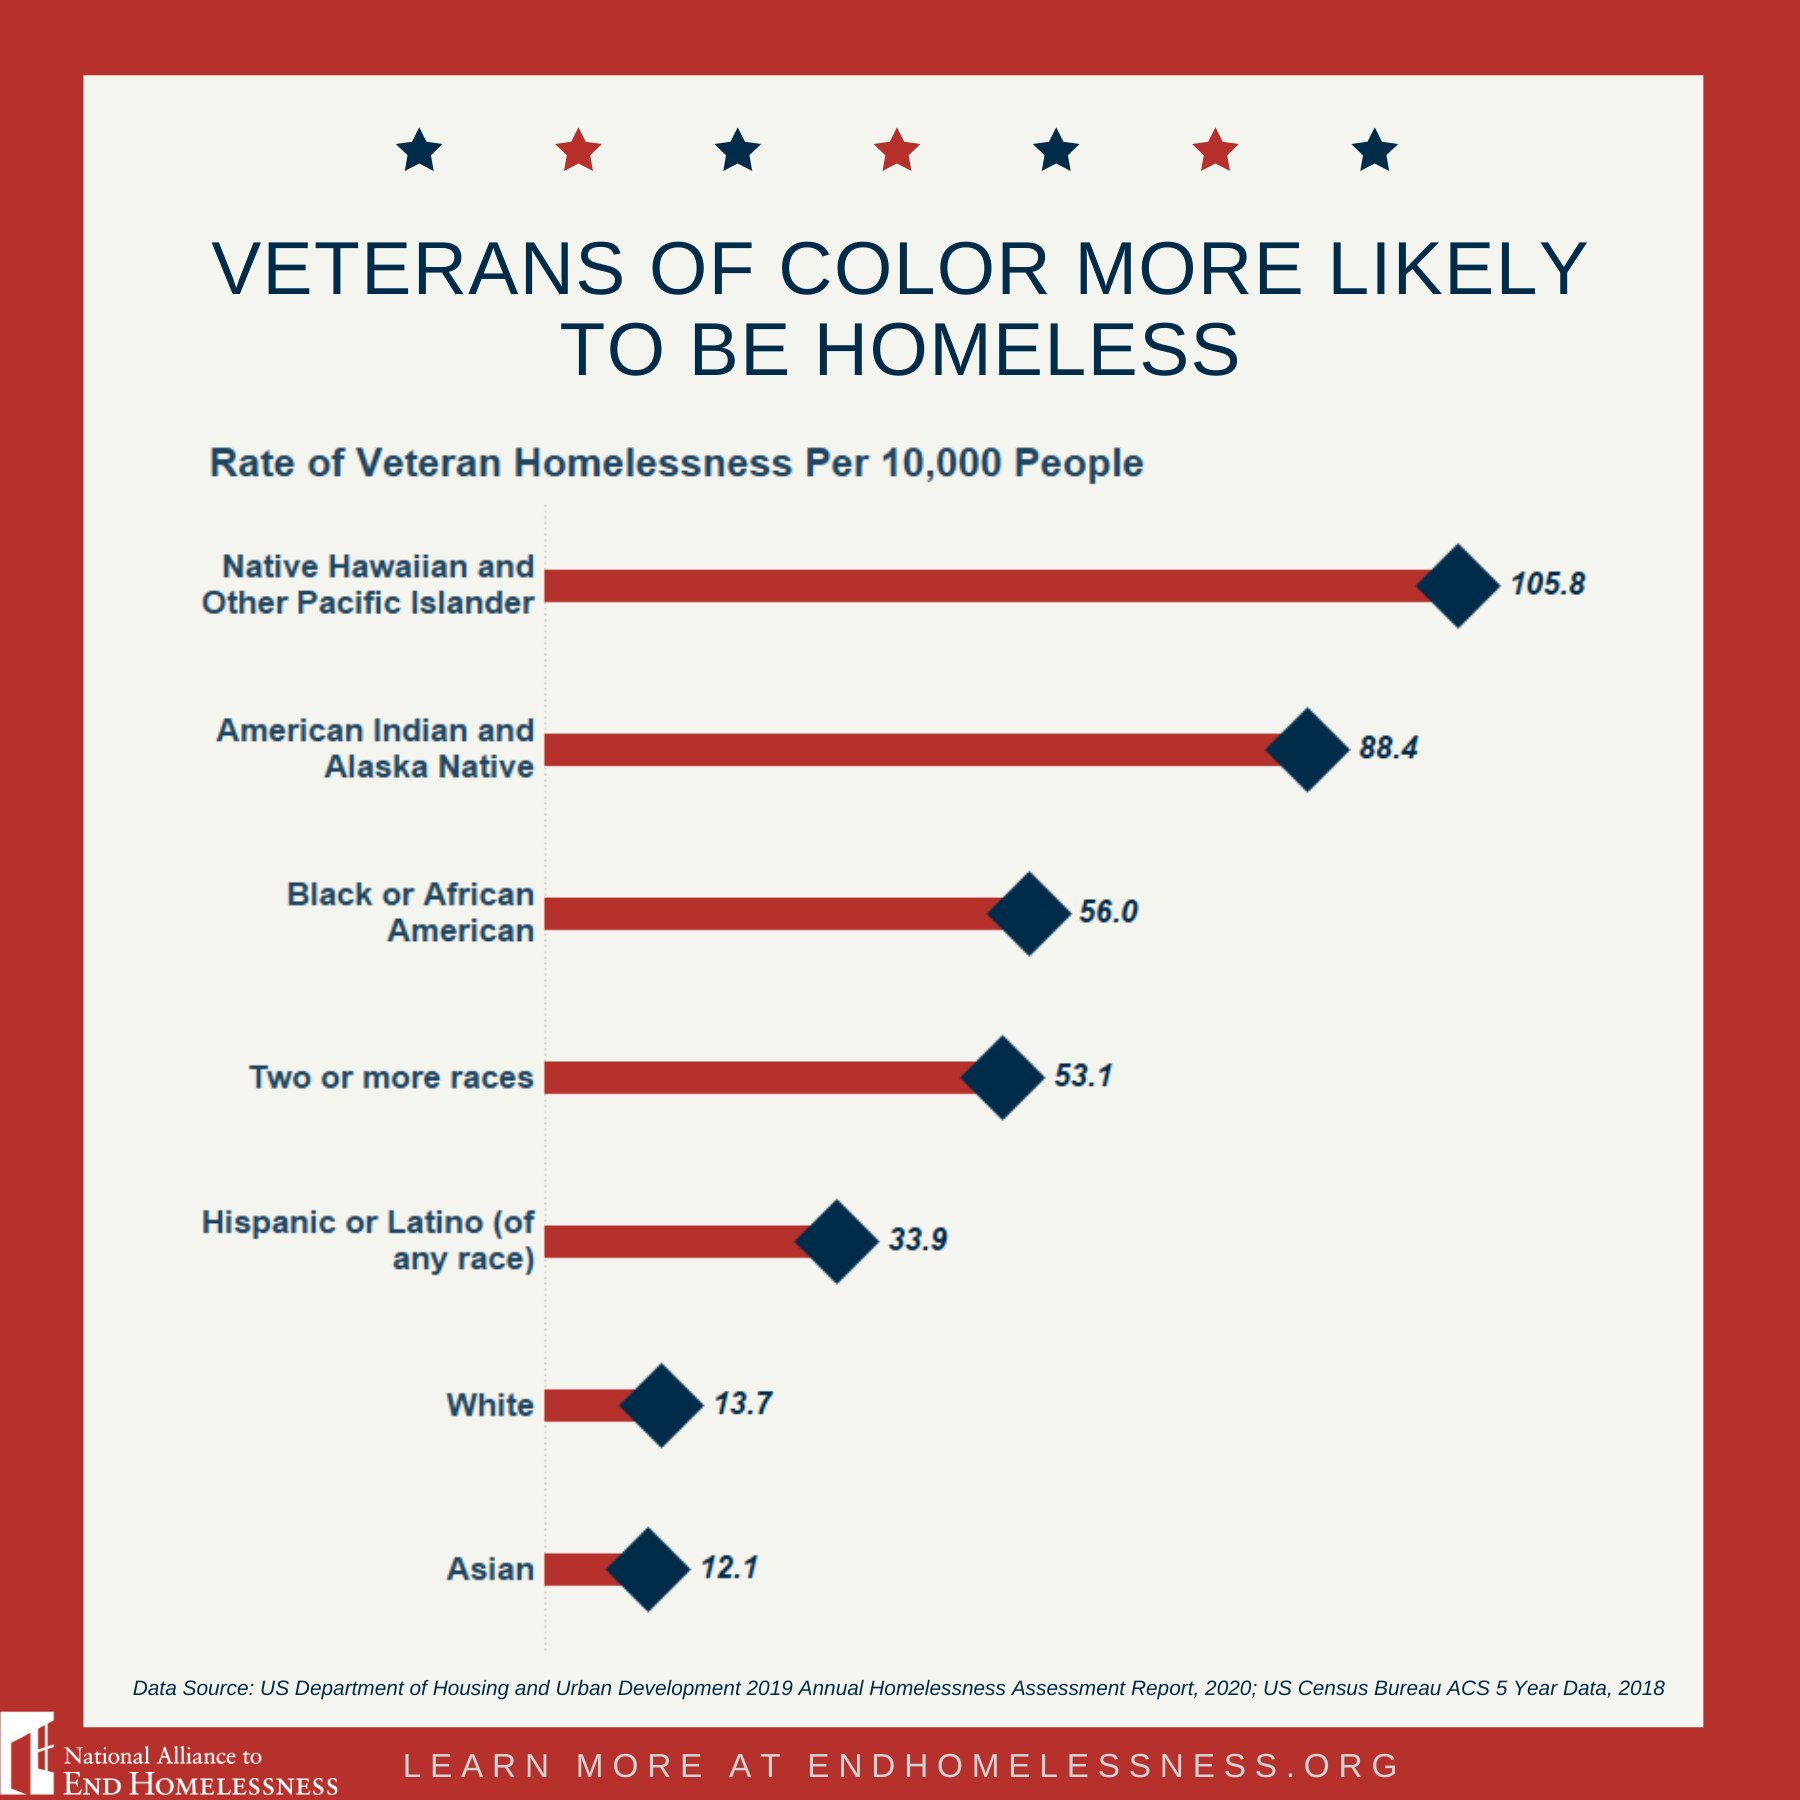 5 Key Facts About Homeless Veterans National Alliance to End Homelessness